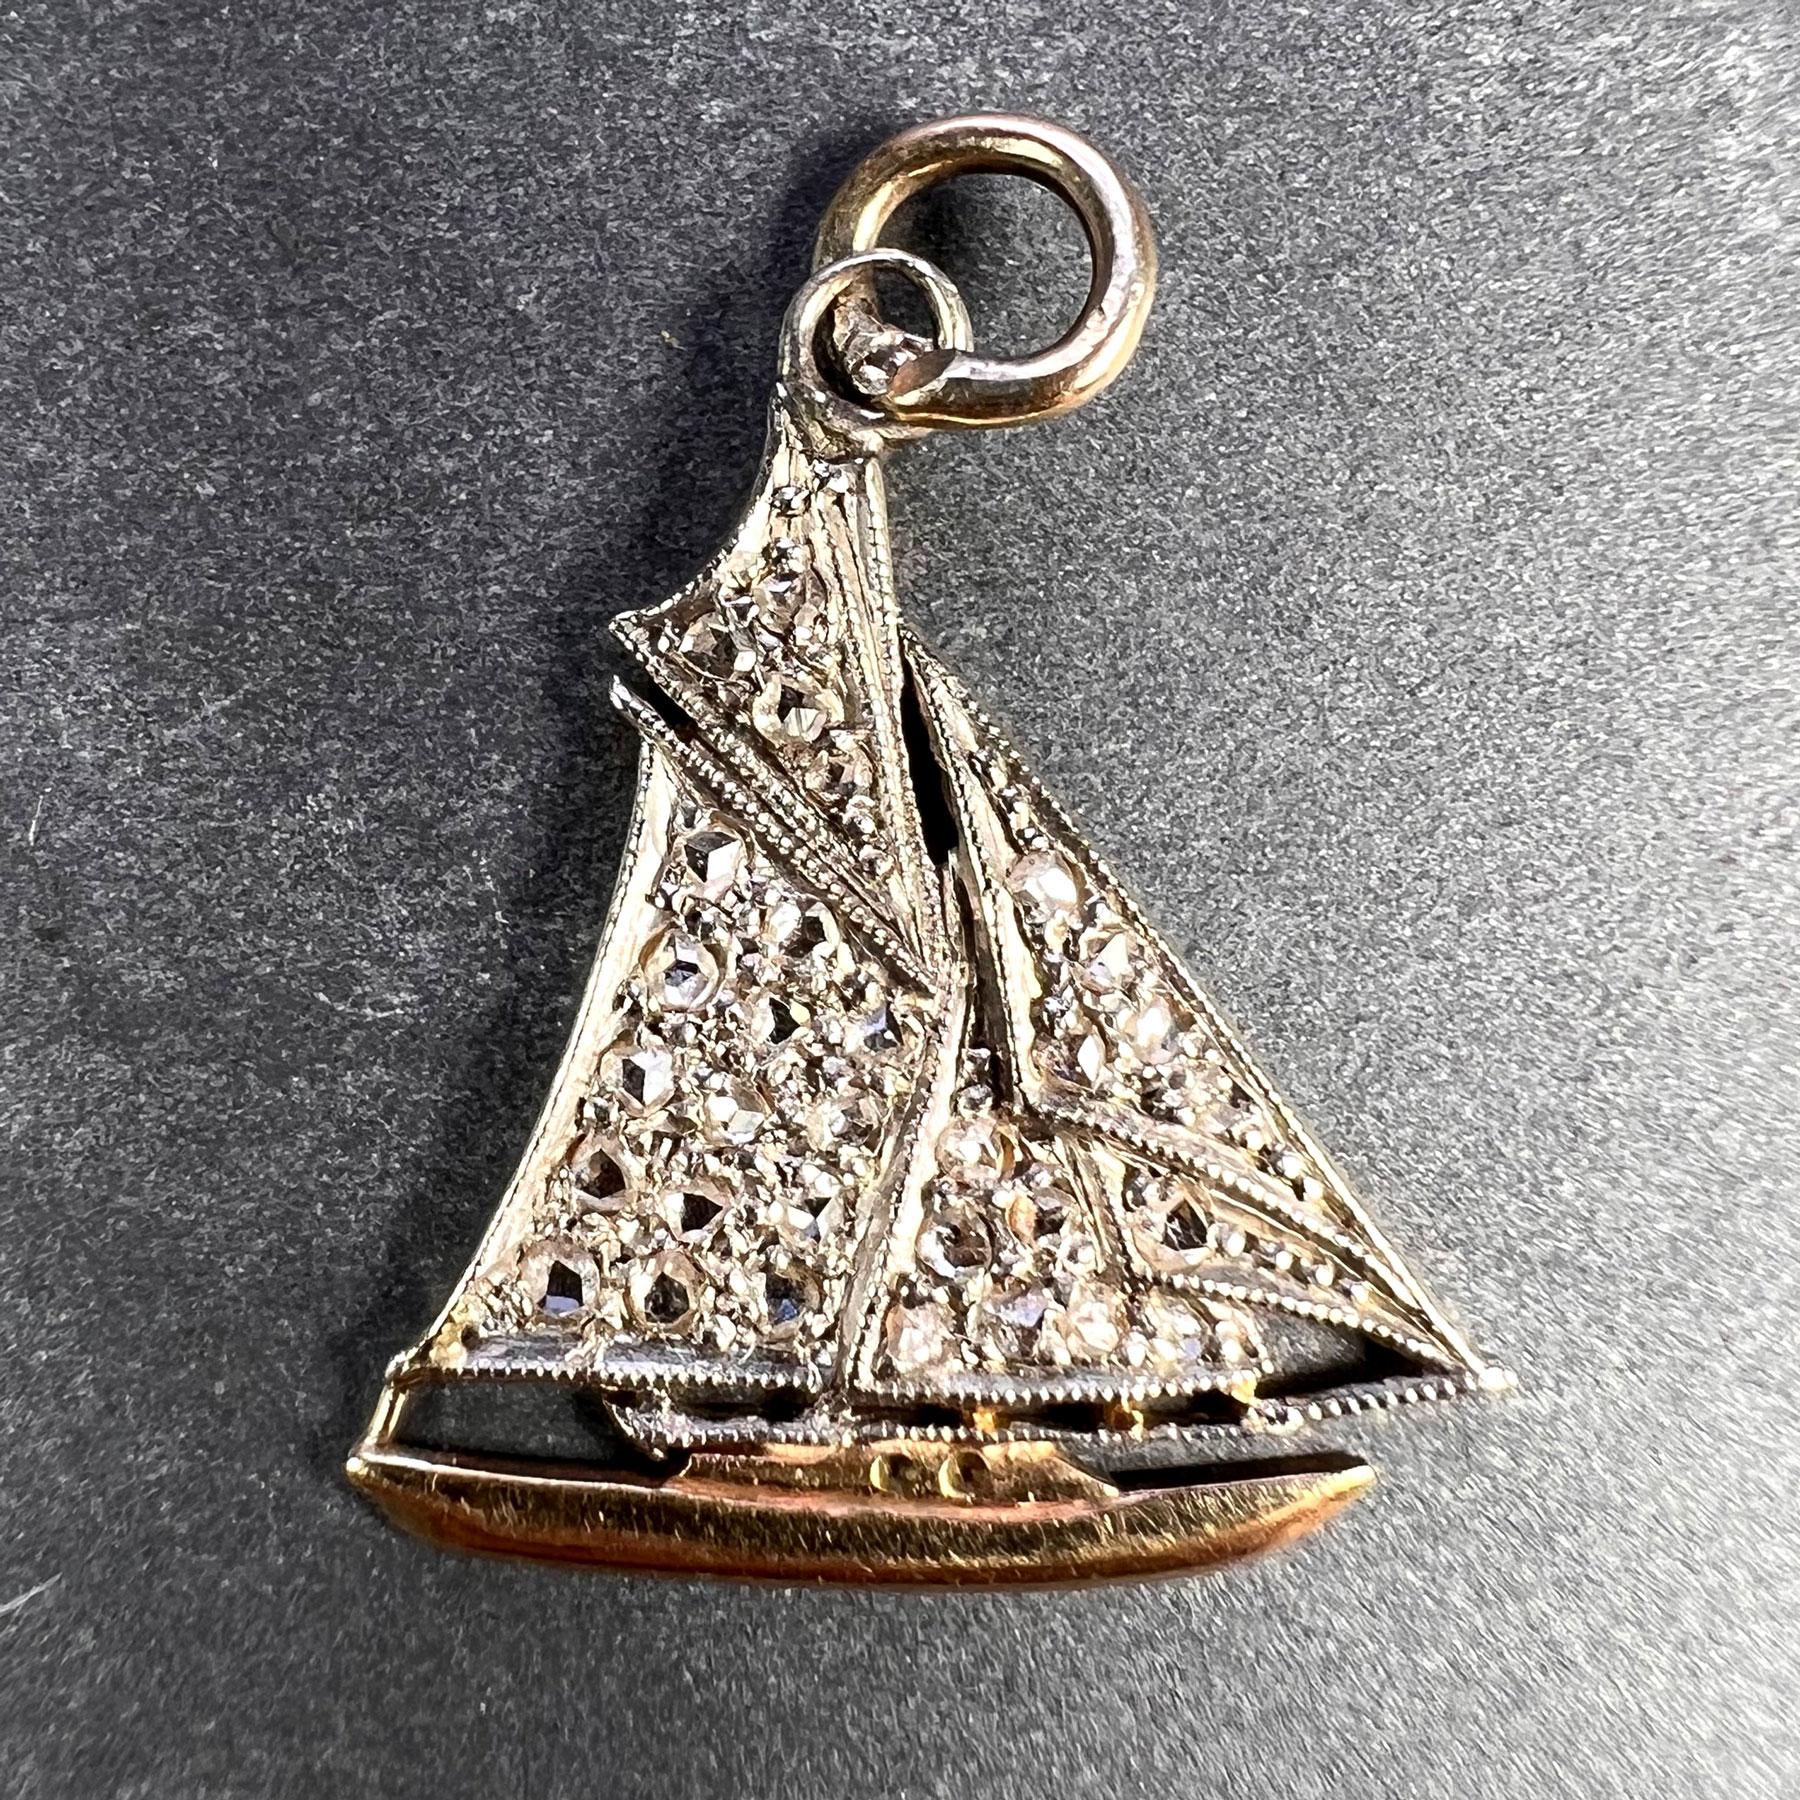 An antique platinum topped 14 karat (14K) yellow gold charm pendant designed as a sailboat or yacht, set with 31 rose-cut diamonds estimated to weigh a total of 0.65 carats. Unmarked but tested for 14 karat gold and platinum.

Dimensions: 2 x 1.7 x